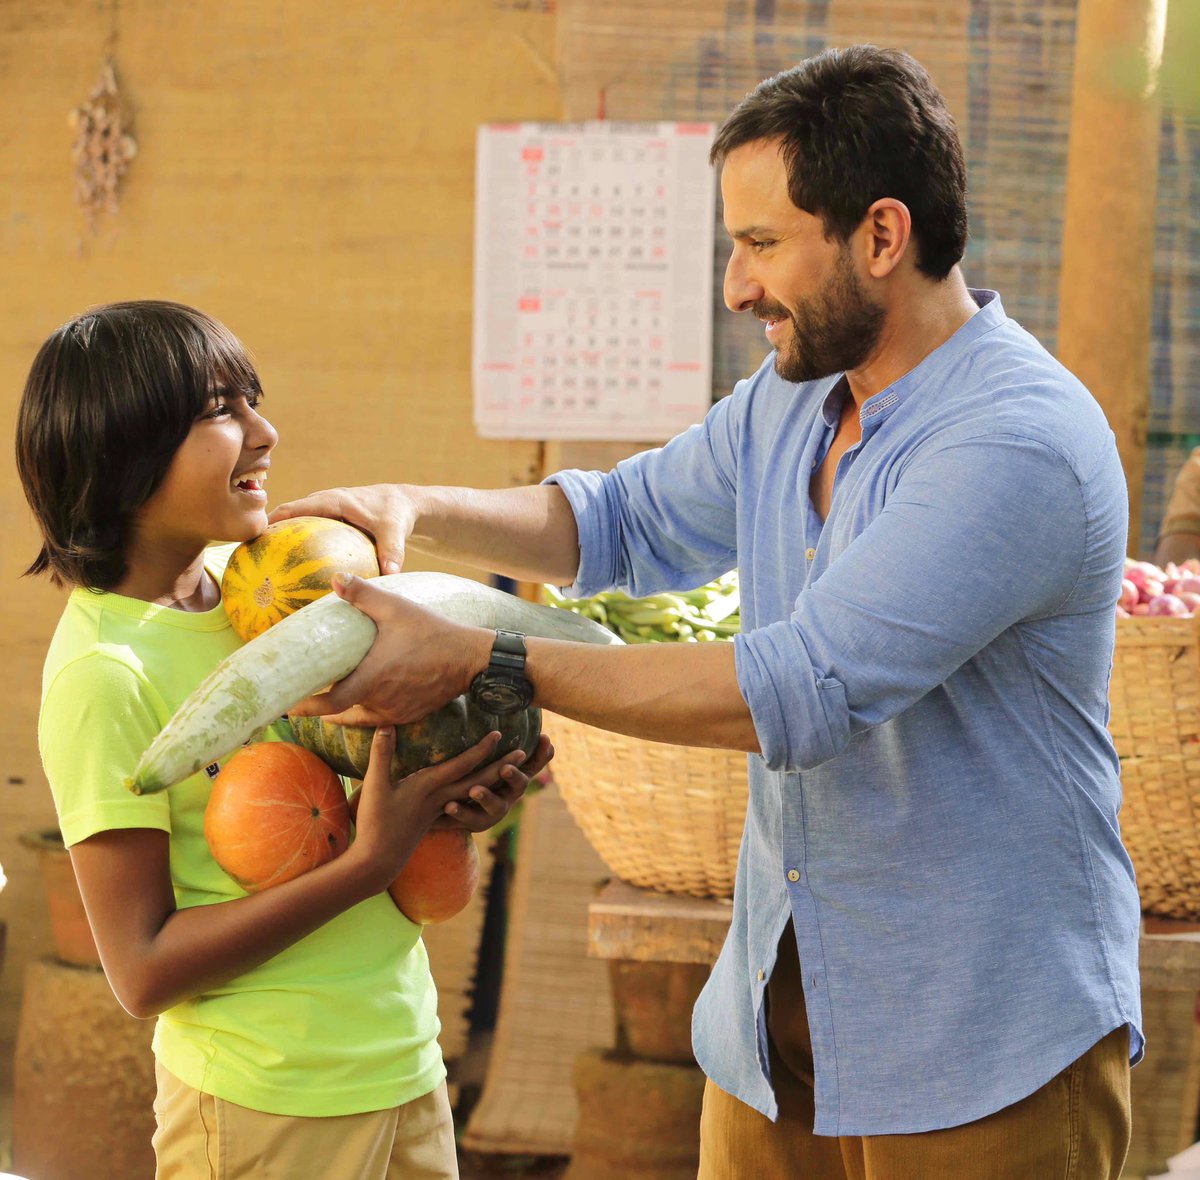 Saif Ali Khan starrer 'Chef' to release in October to avoid clashes with Jagga Jasoos